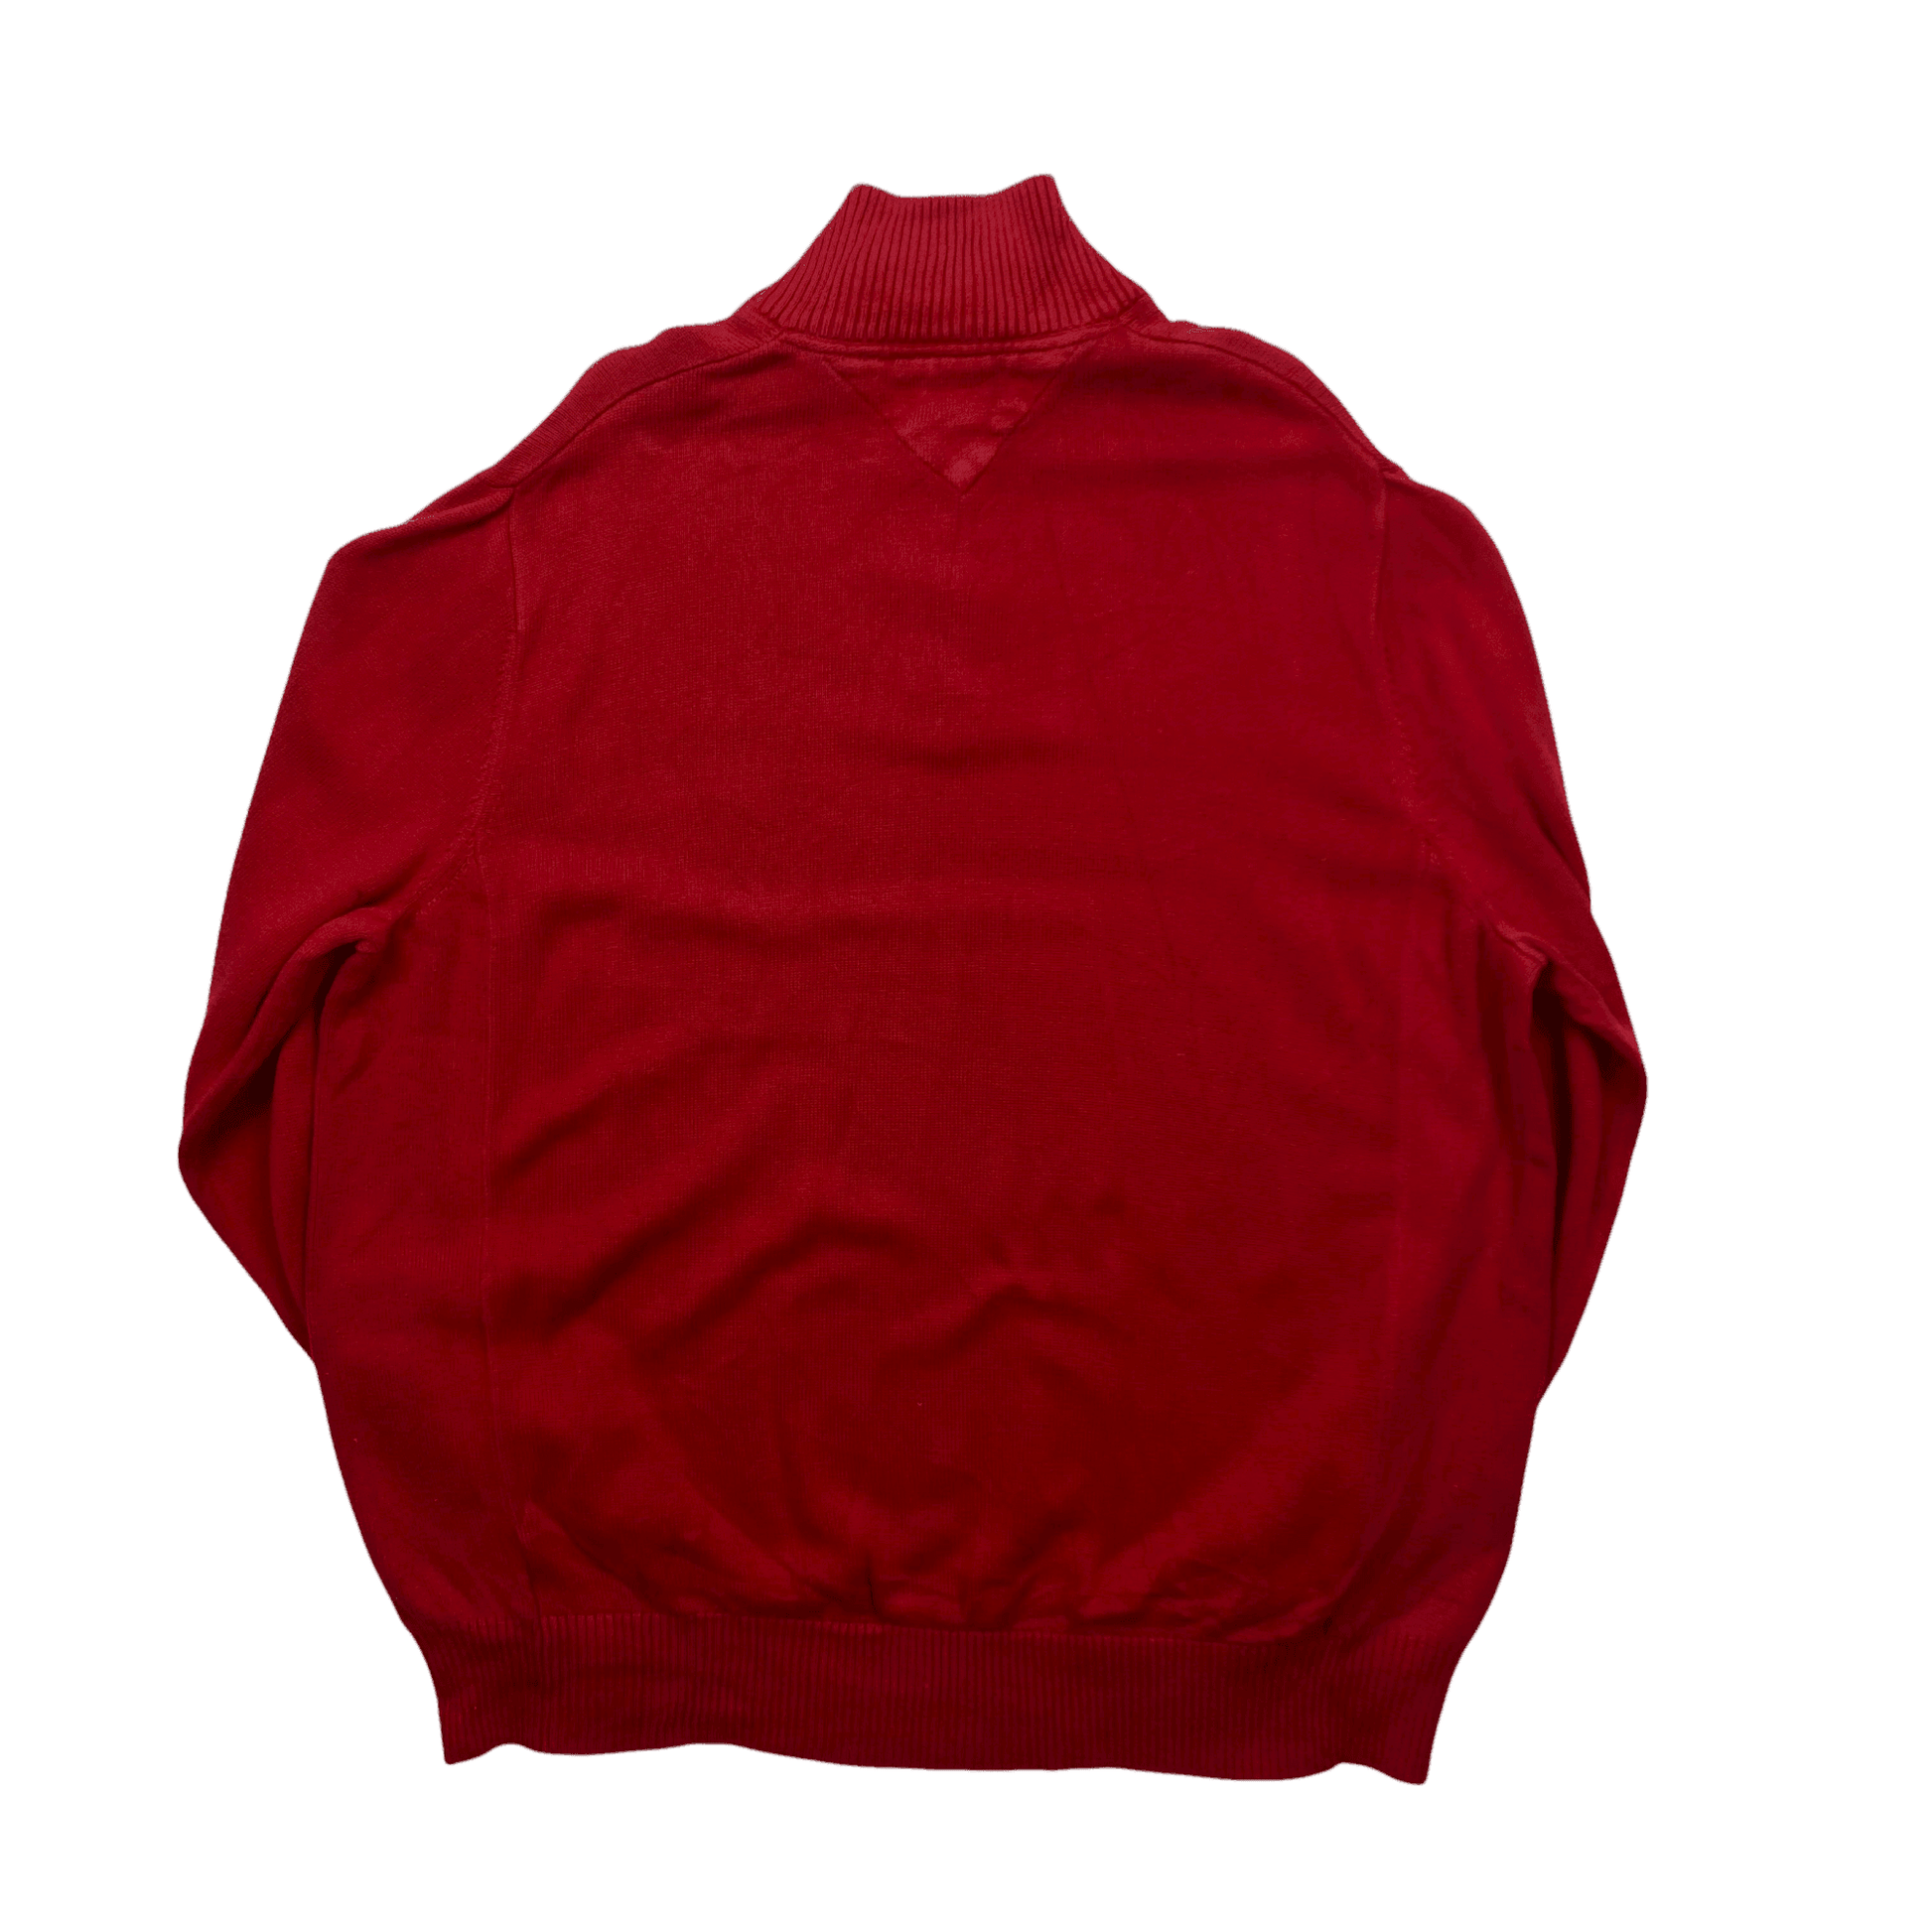 Vintage 90s Red Tommy Hilfiger Quarter Zip Knitted Sweatshirt - Extra Large - The Streetwear Studio